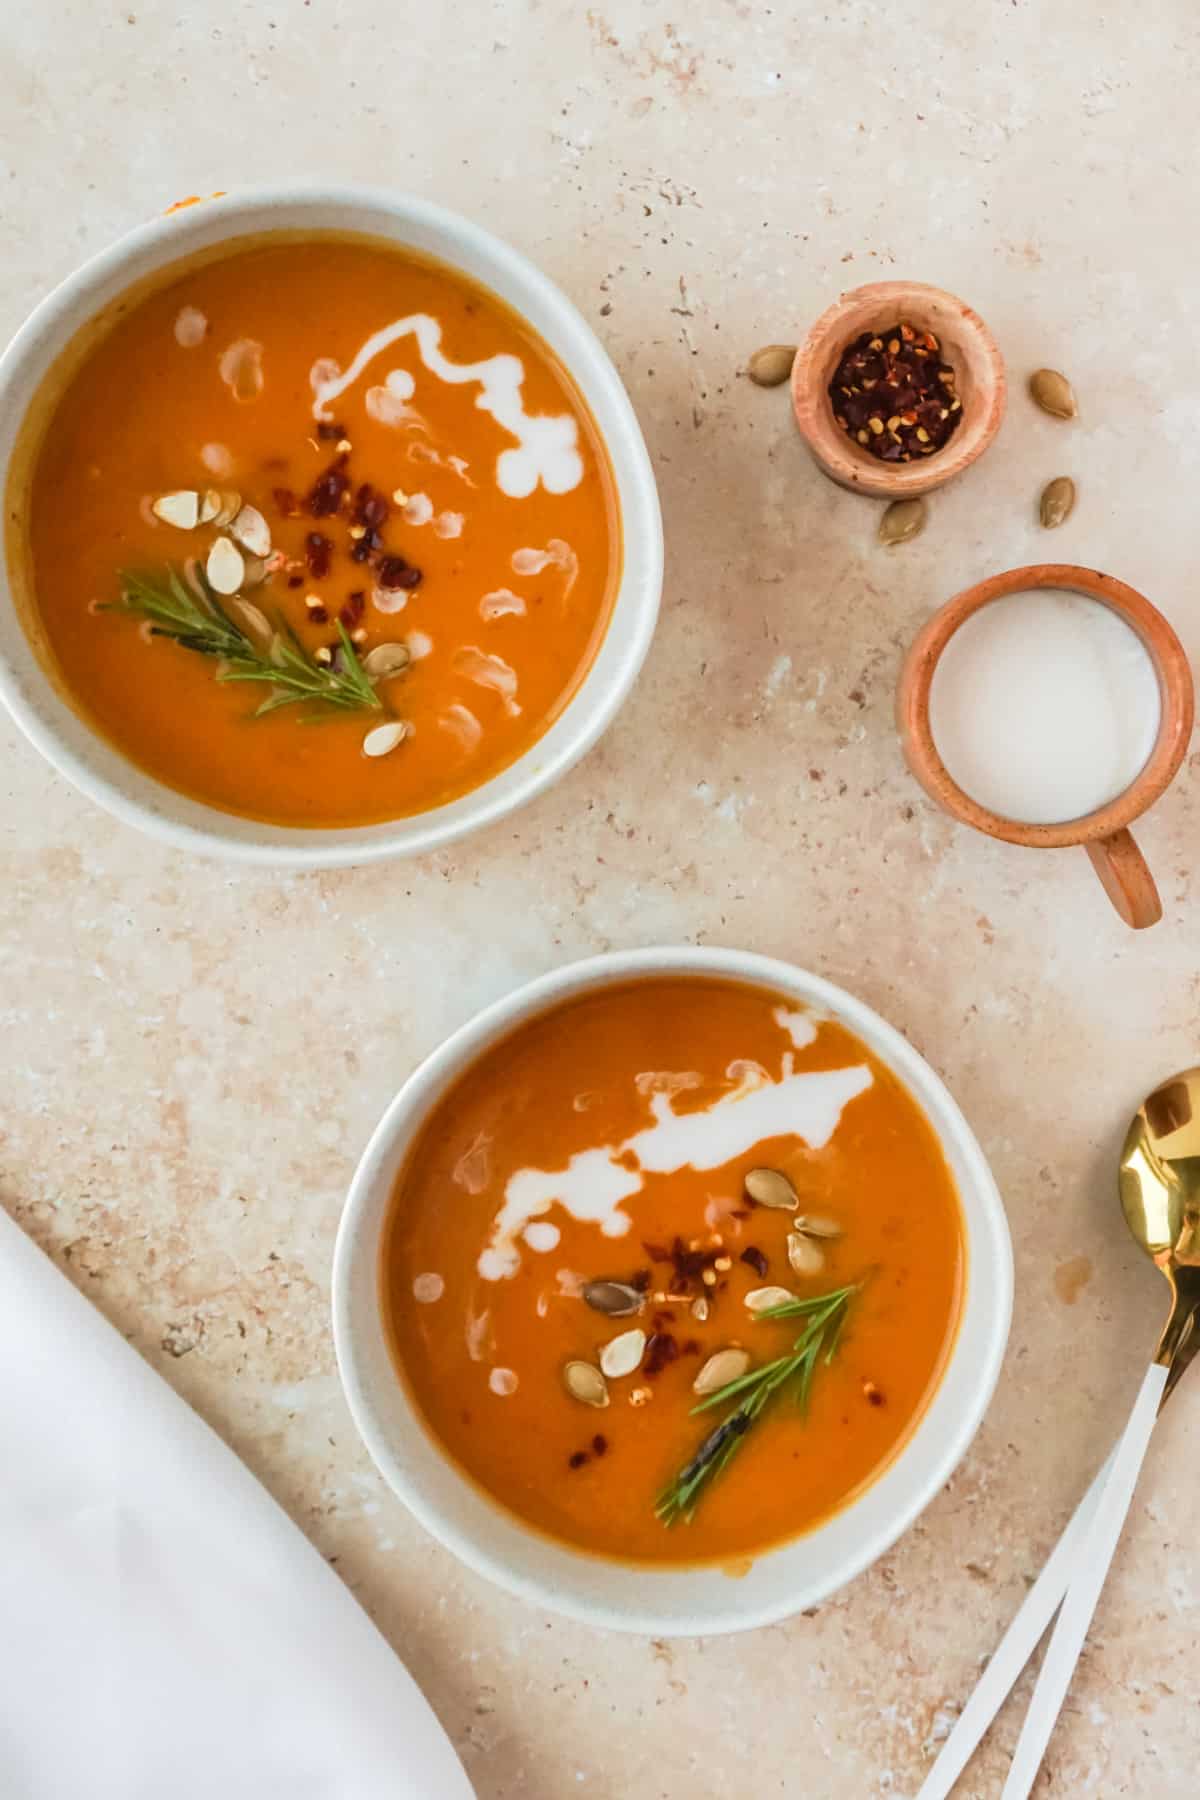 Two bowls of butternut squash soup with a cup of milk.